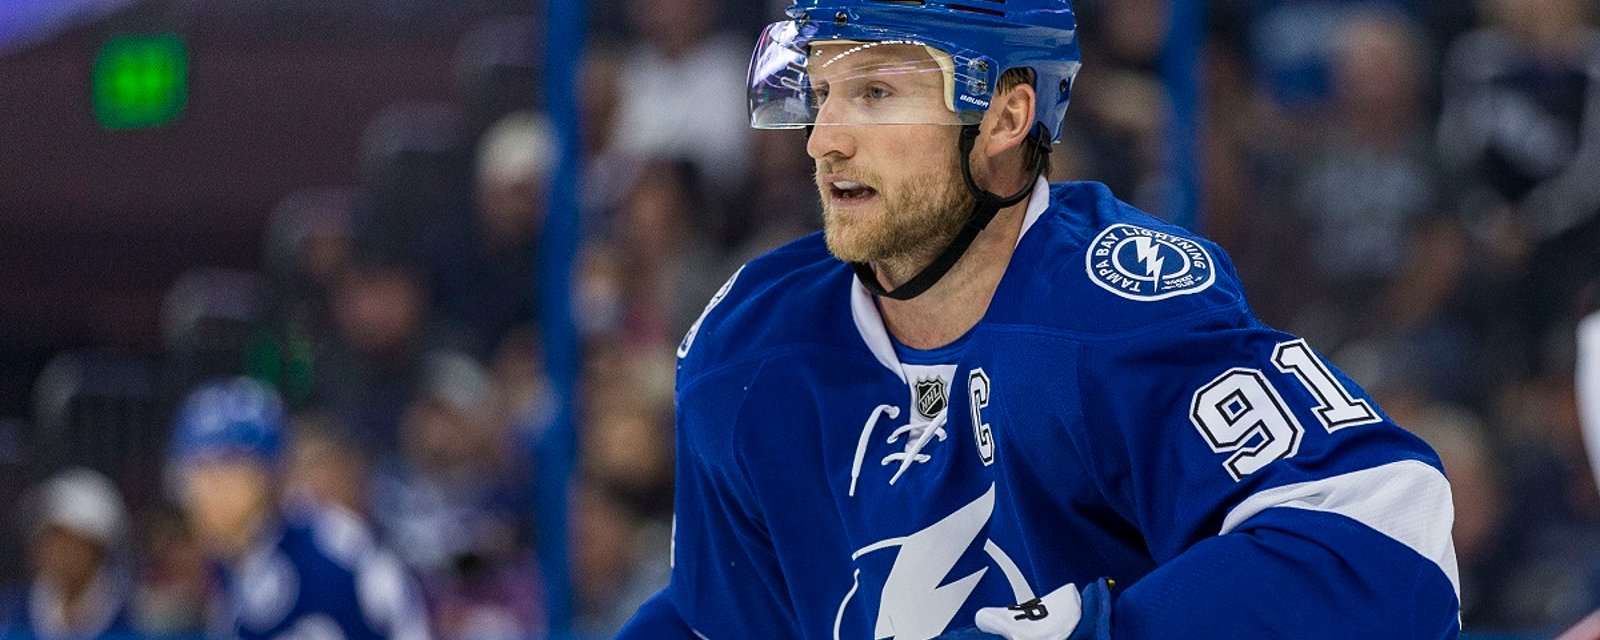 Signs point to a serious injury for Lightning captain Steven Stamkos.